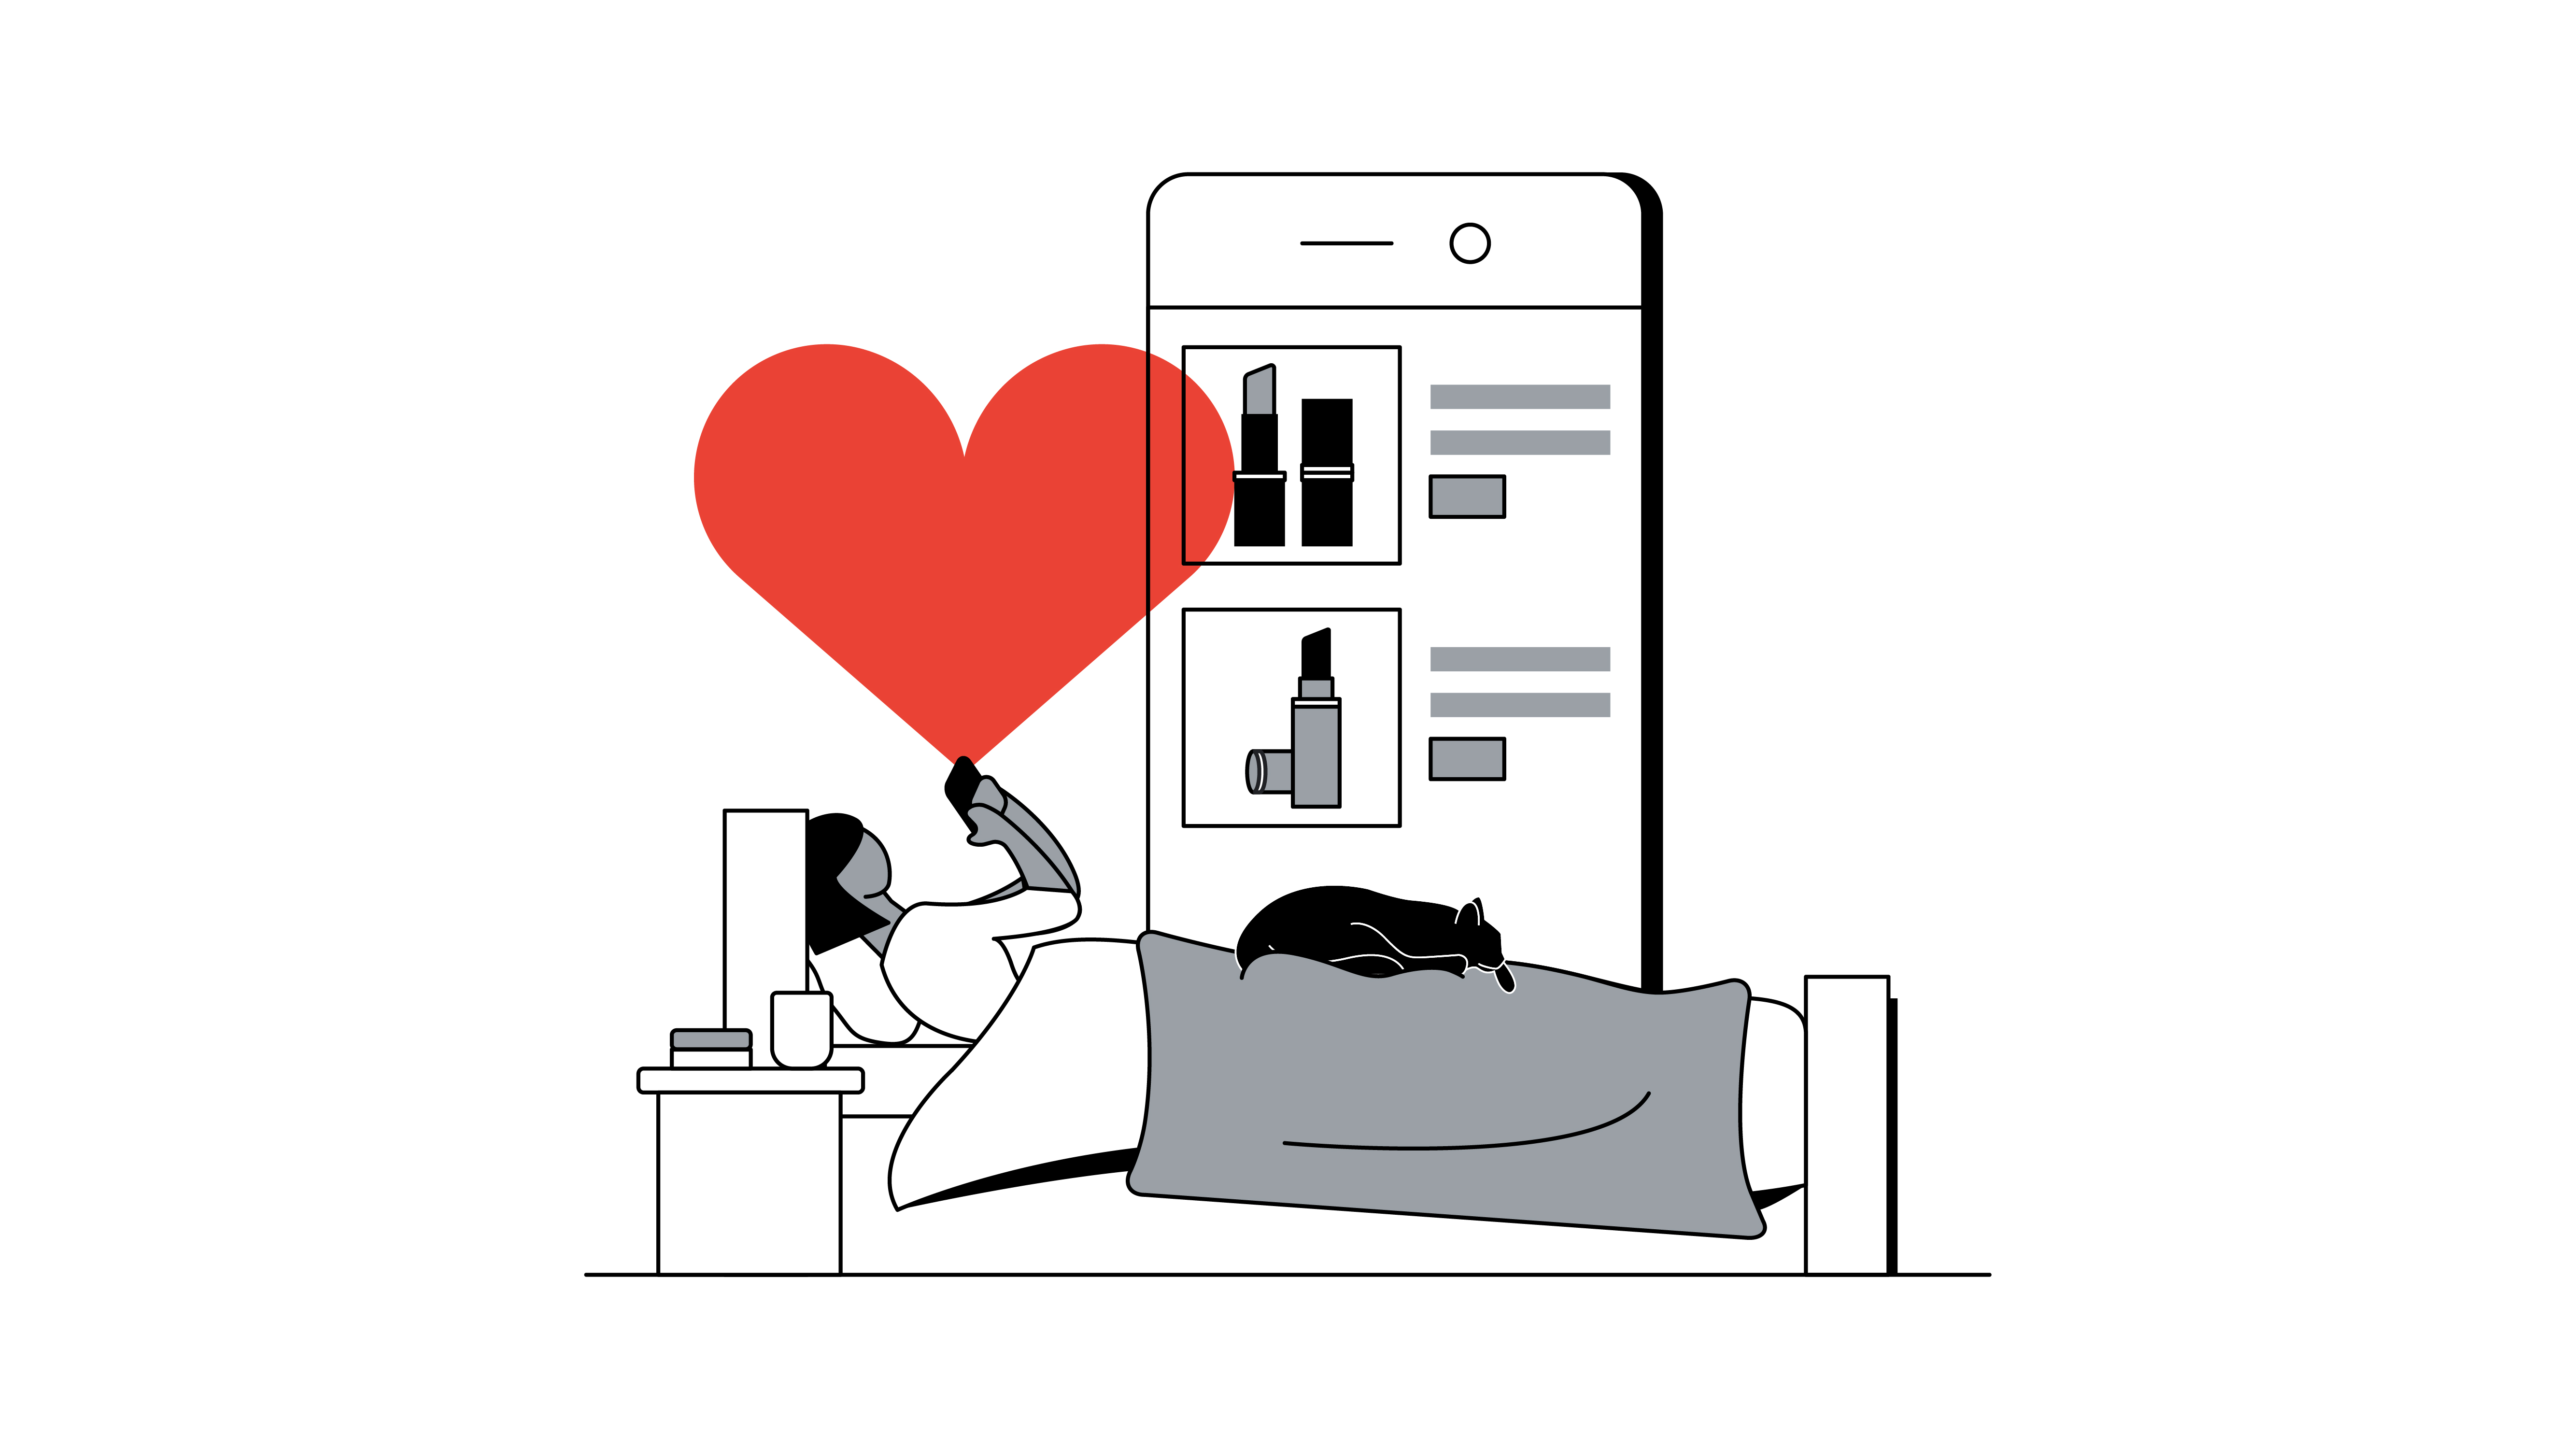 A stylised illustration of a person browsing their phone from bed with a black cat curled up at their feet, and a red heart above them. A smartphone screen displaying products can be seen in the background.